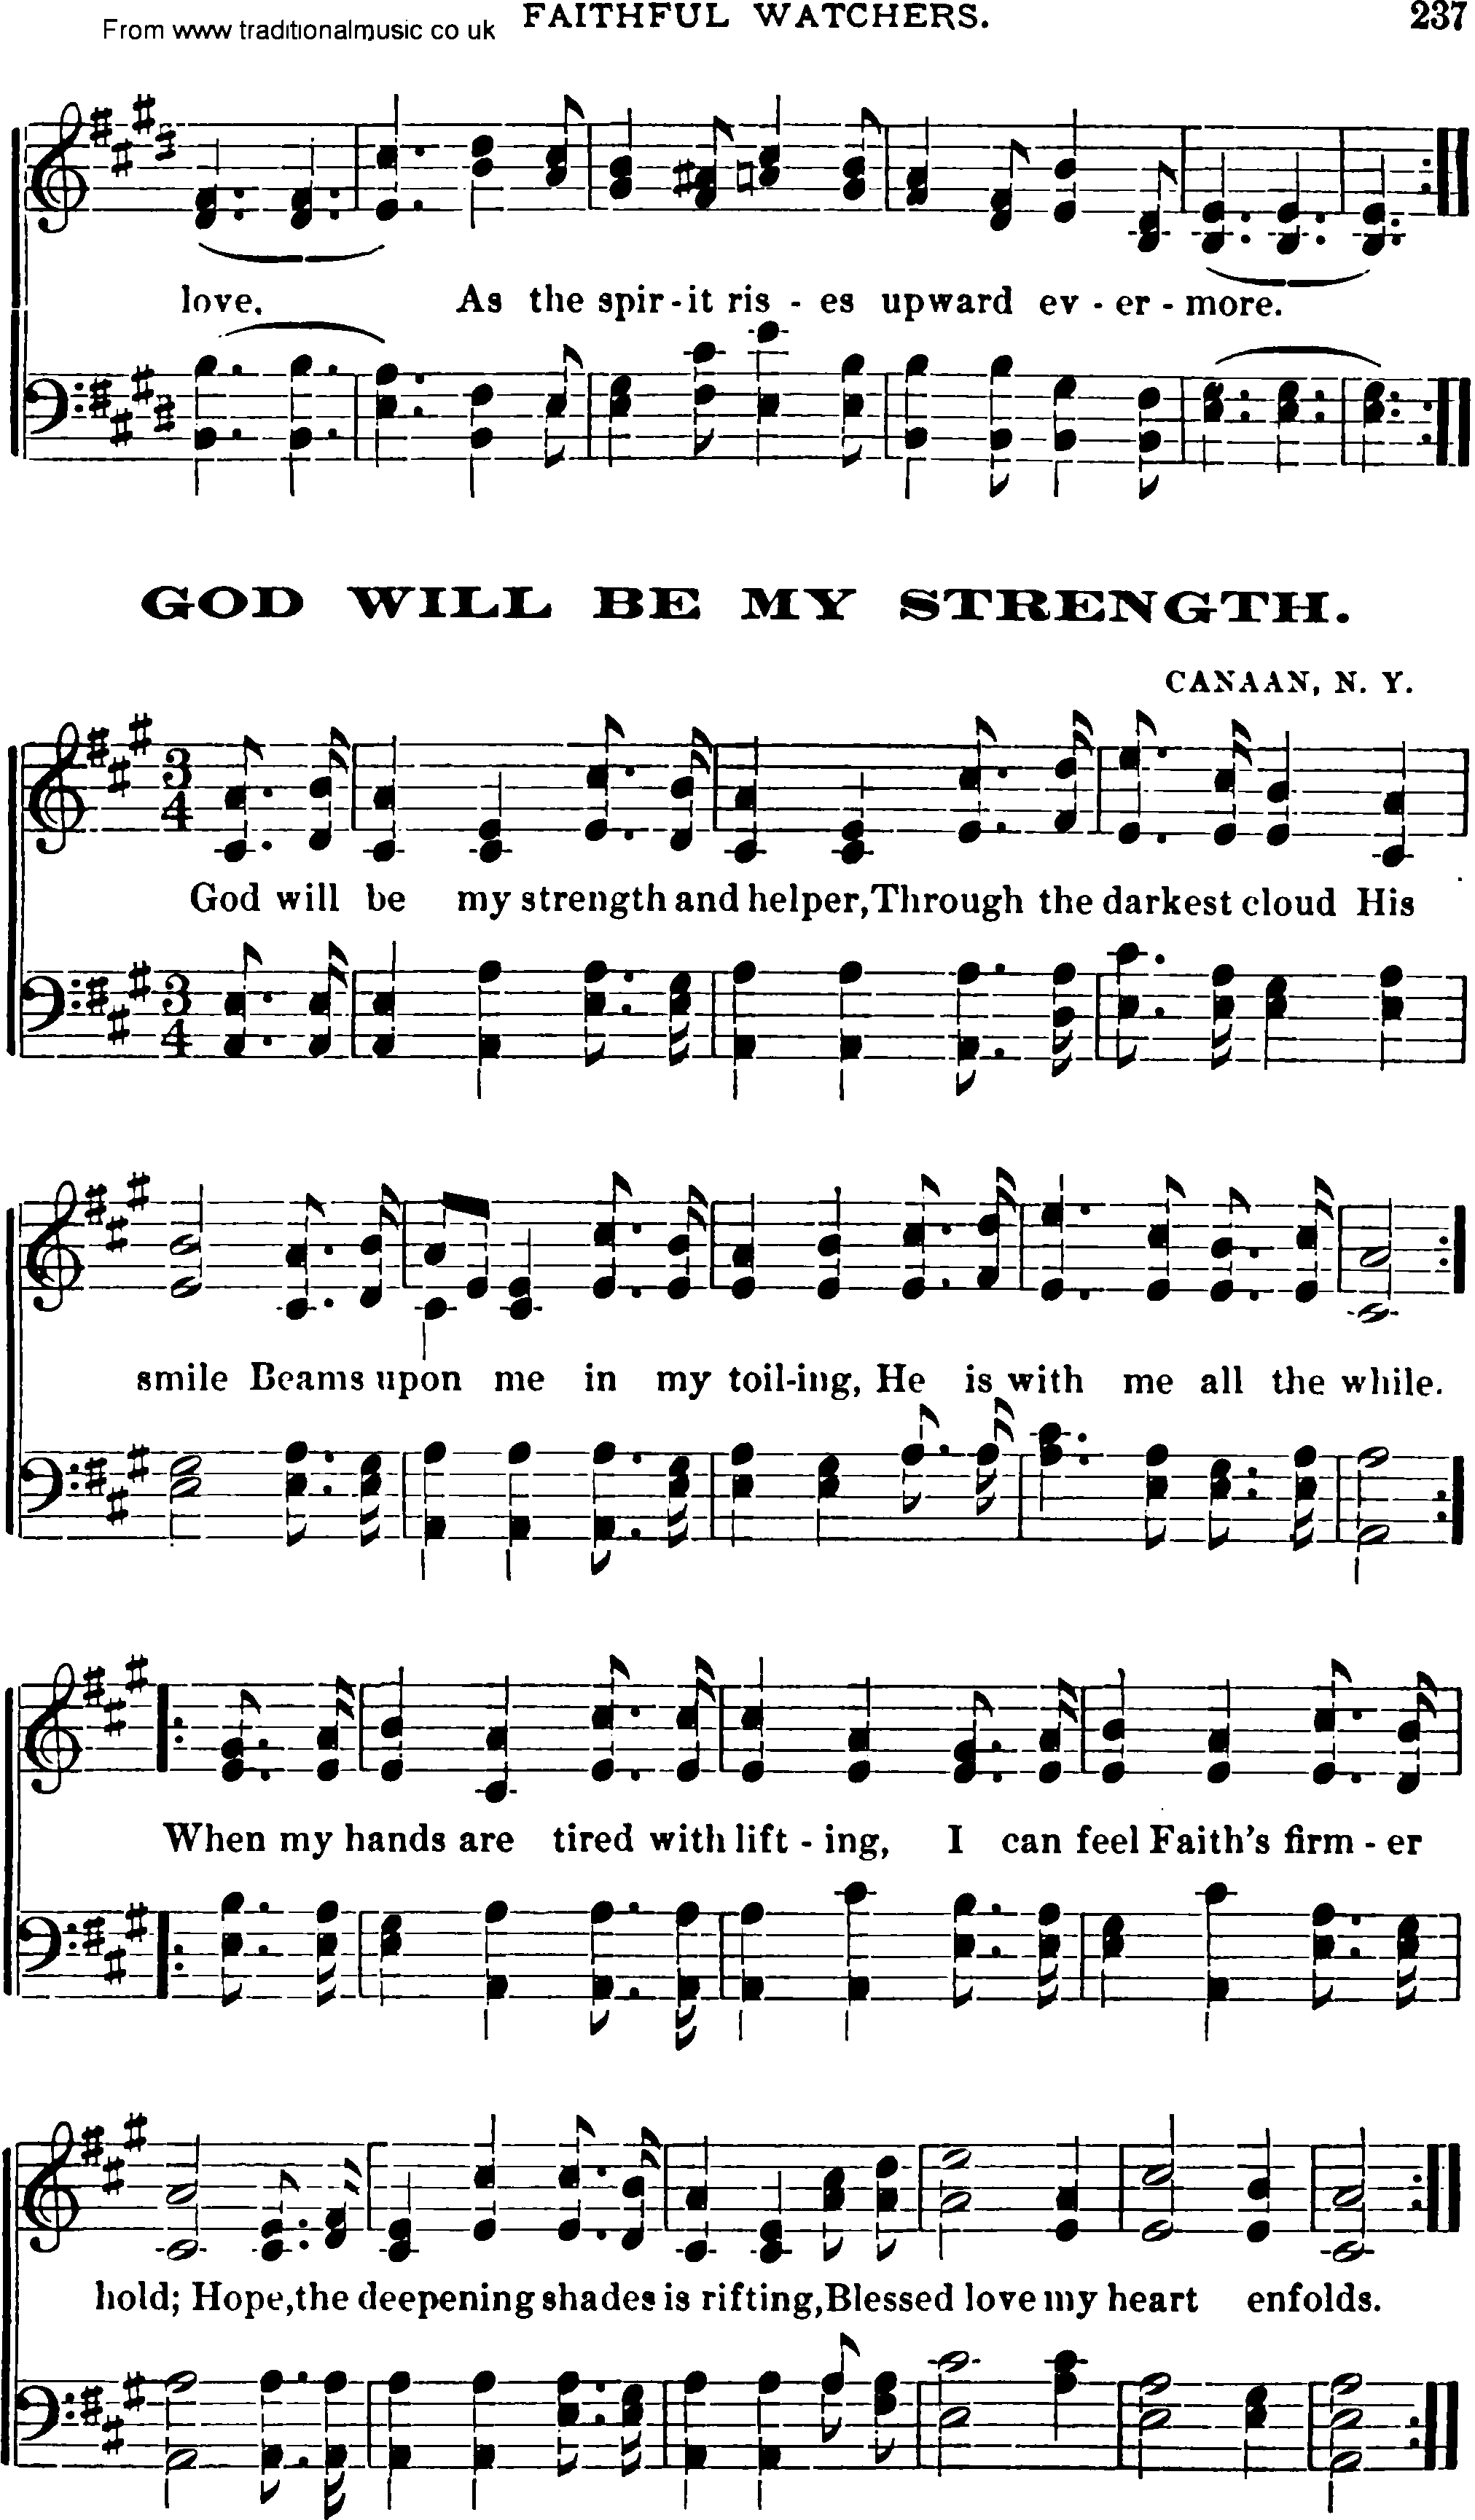 Shaker Music collection, Hymn: God Will Be My Strength, sheetmusic and PDF